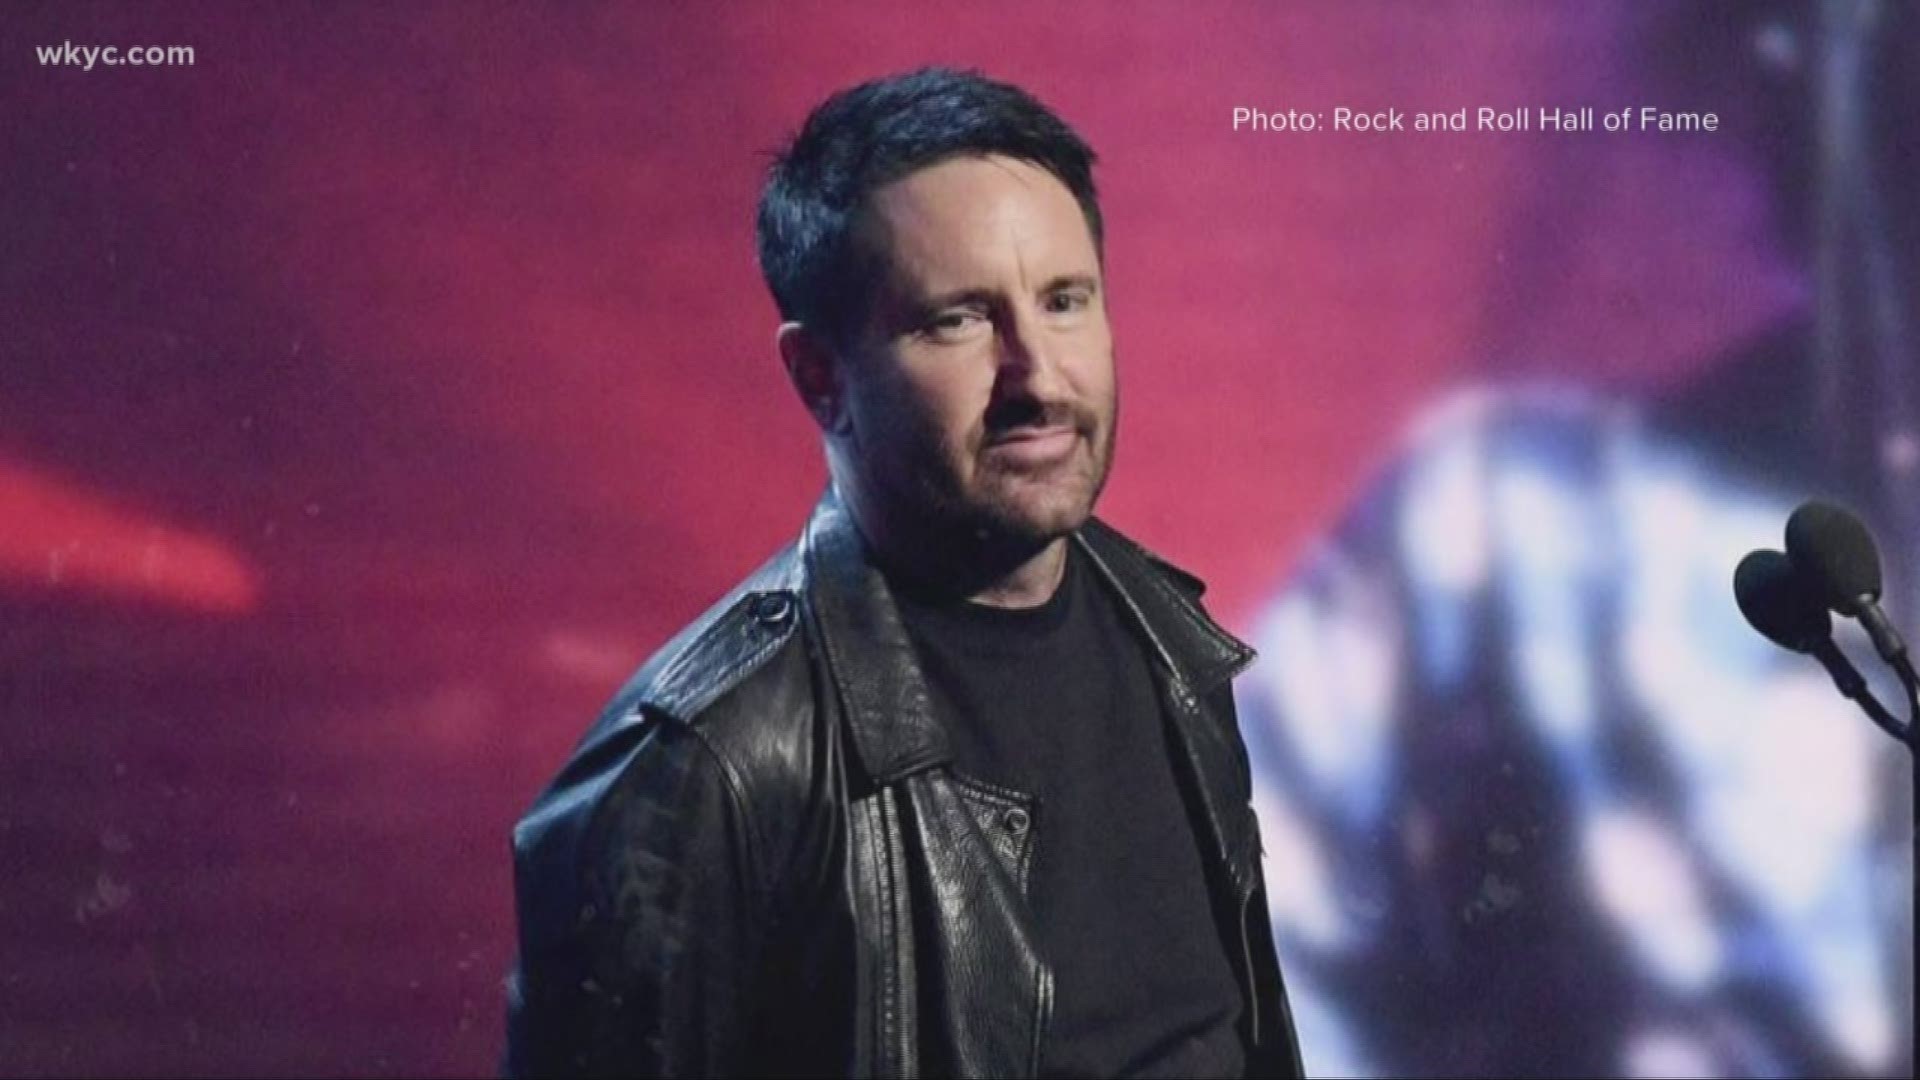 Trent Reznor from Nine Inch Nails was studying computer engineering, but couldn't shake his desire to create music. So he moved to Cleveland!